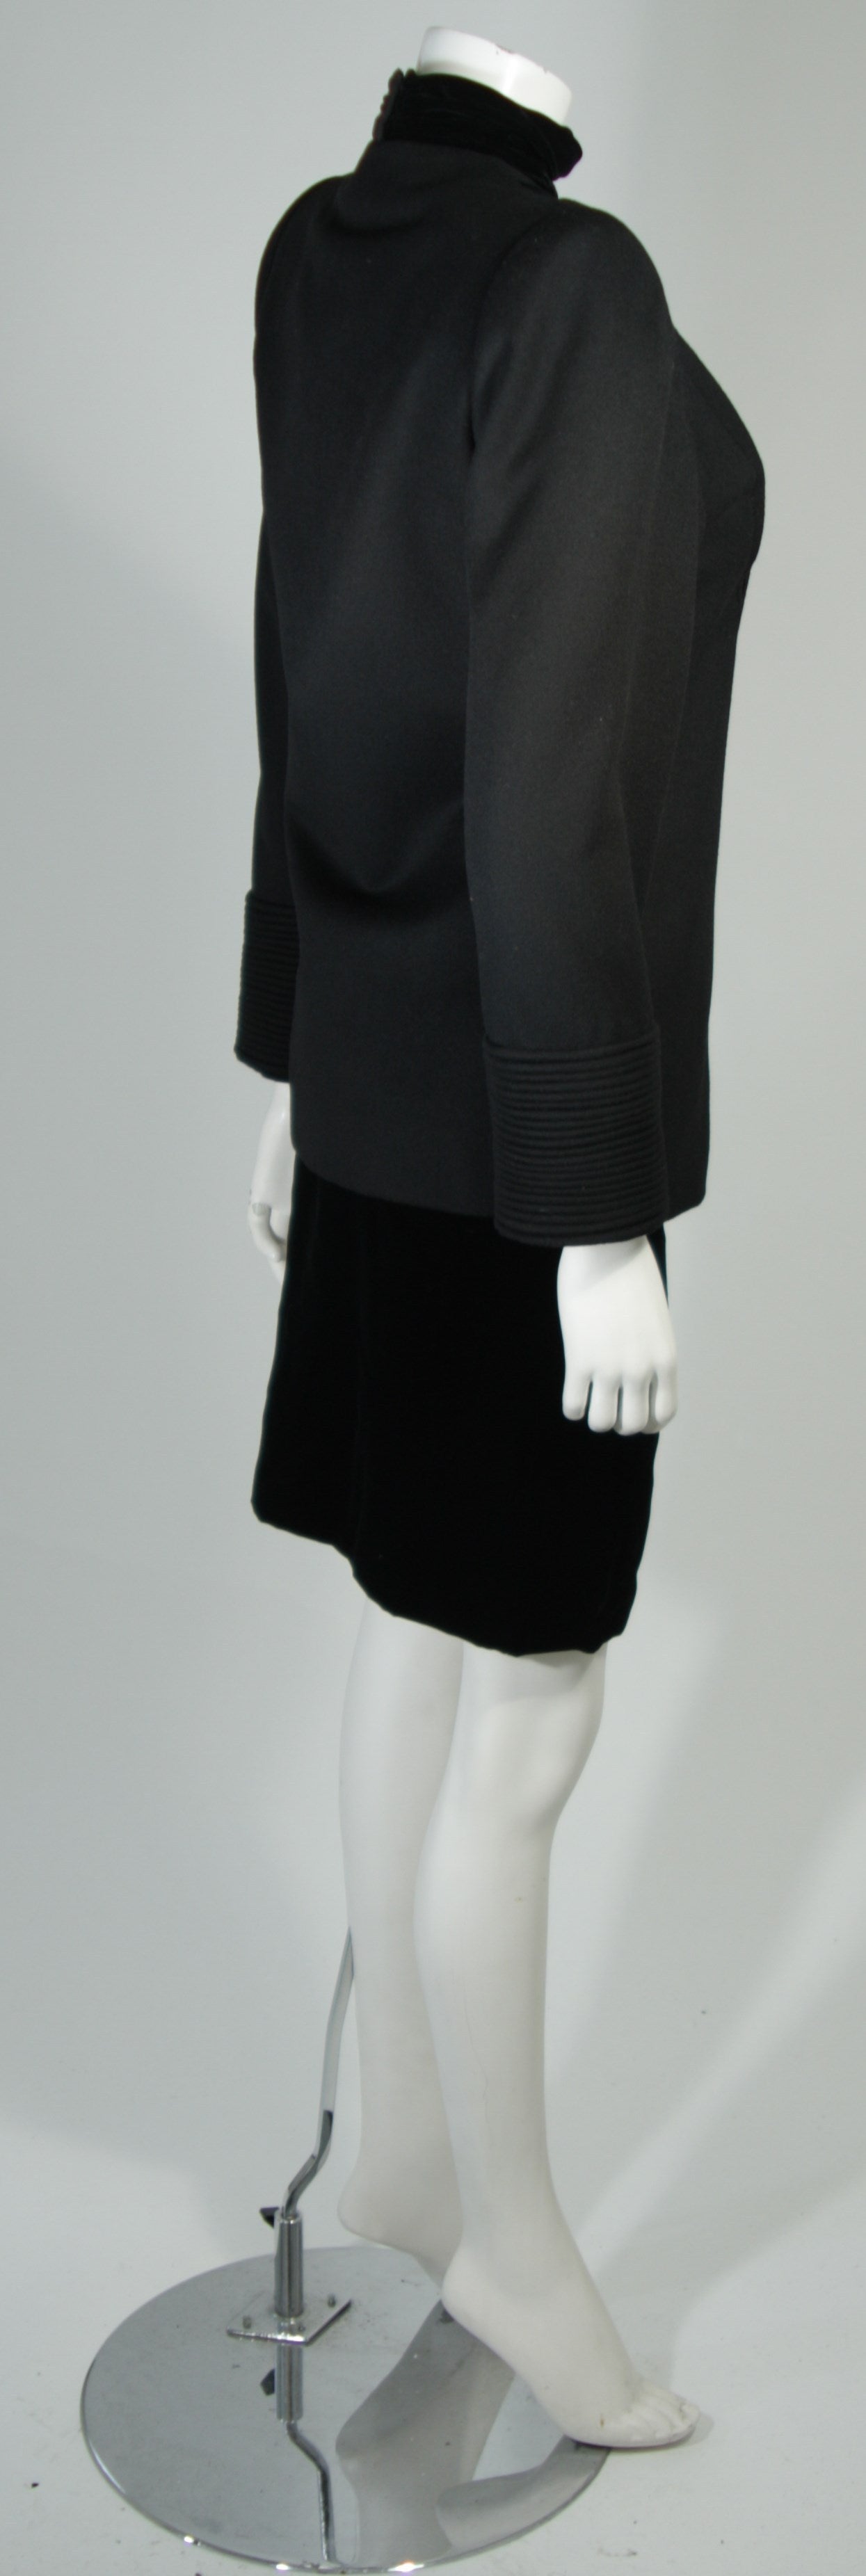 Galanos Couture Black Wool and Velvet Skirt Suit Ensemble Size 2 4 1